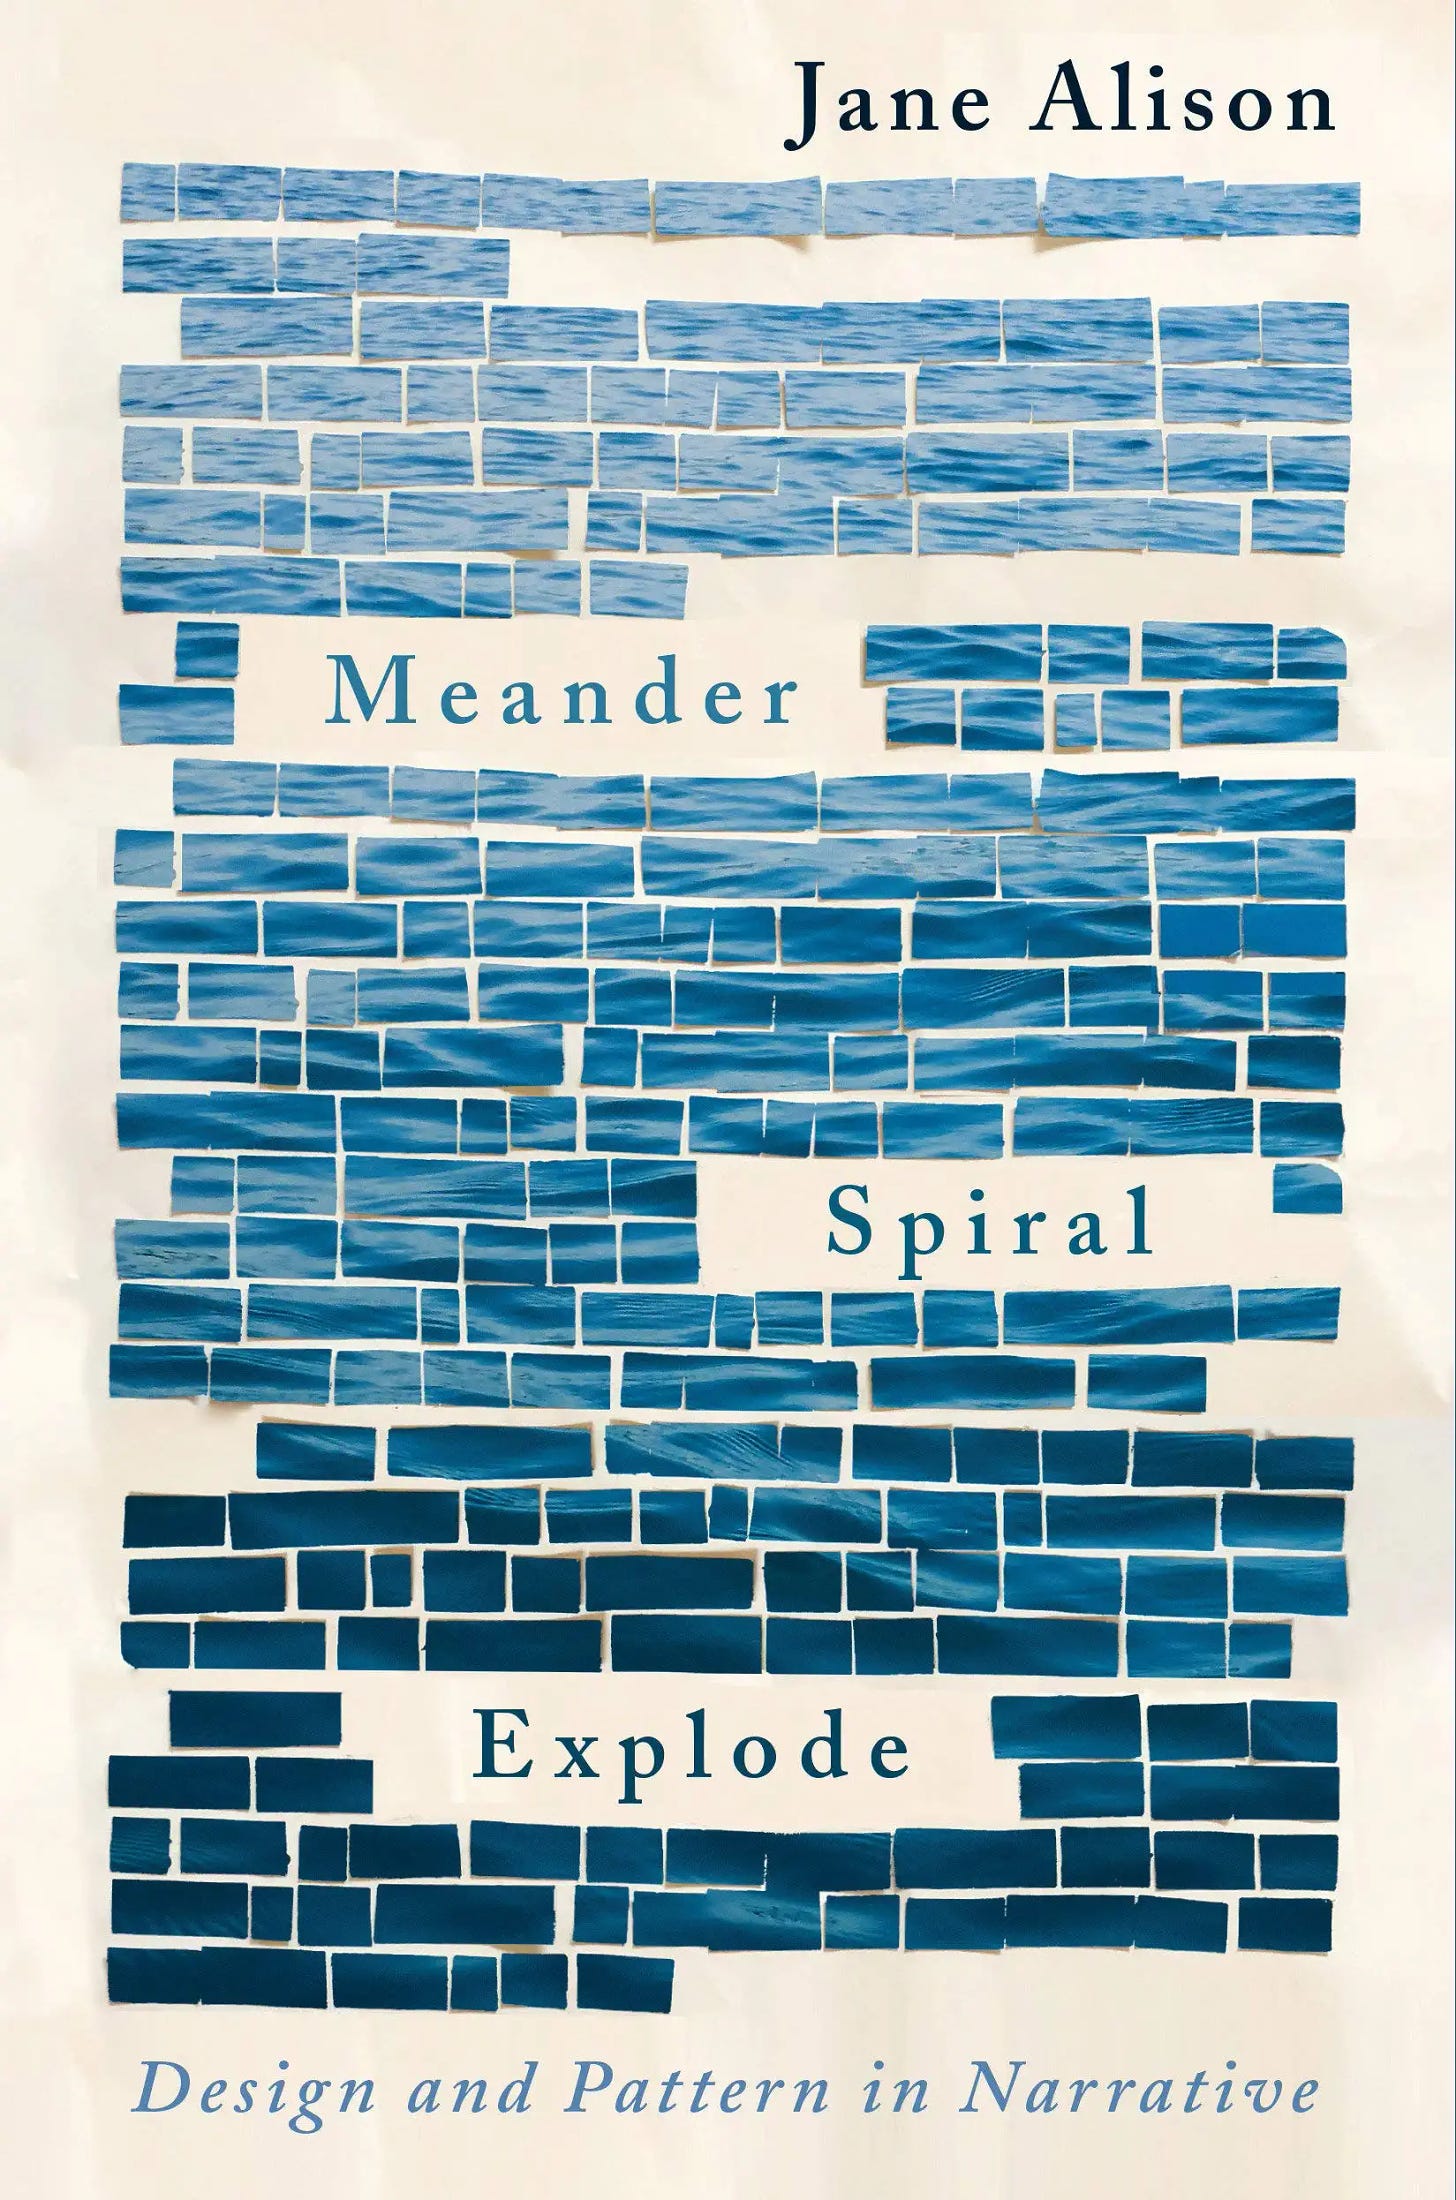 Cover of MEANDER SPIRAL EXPLODE by Jane Alison